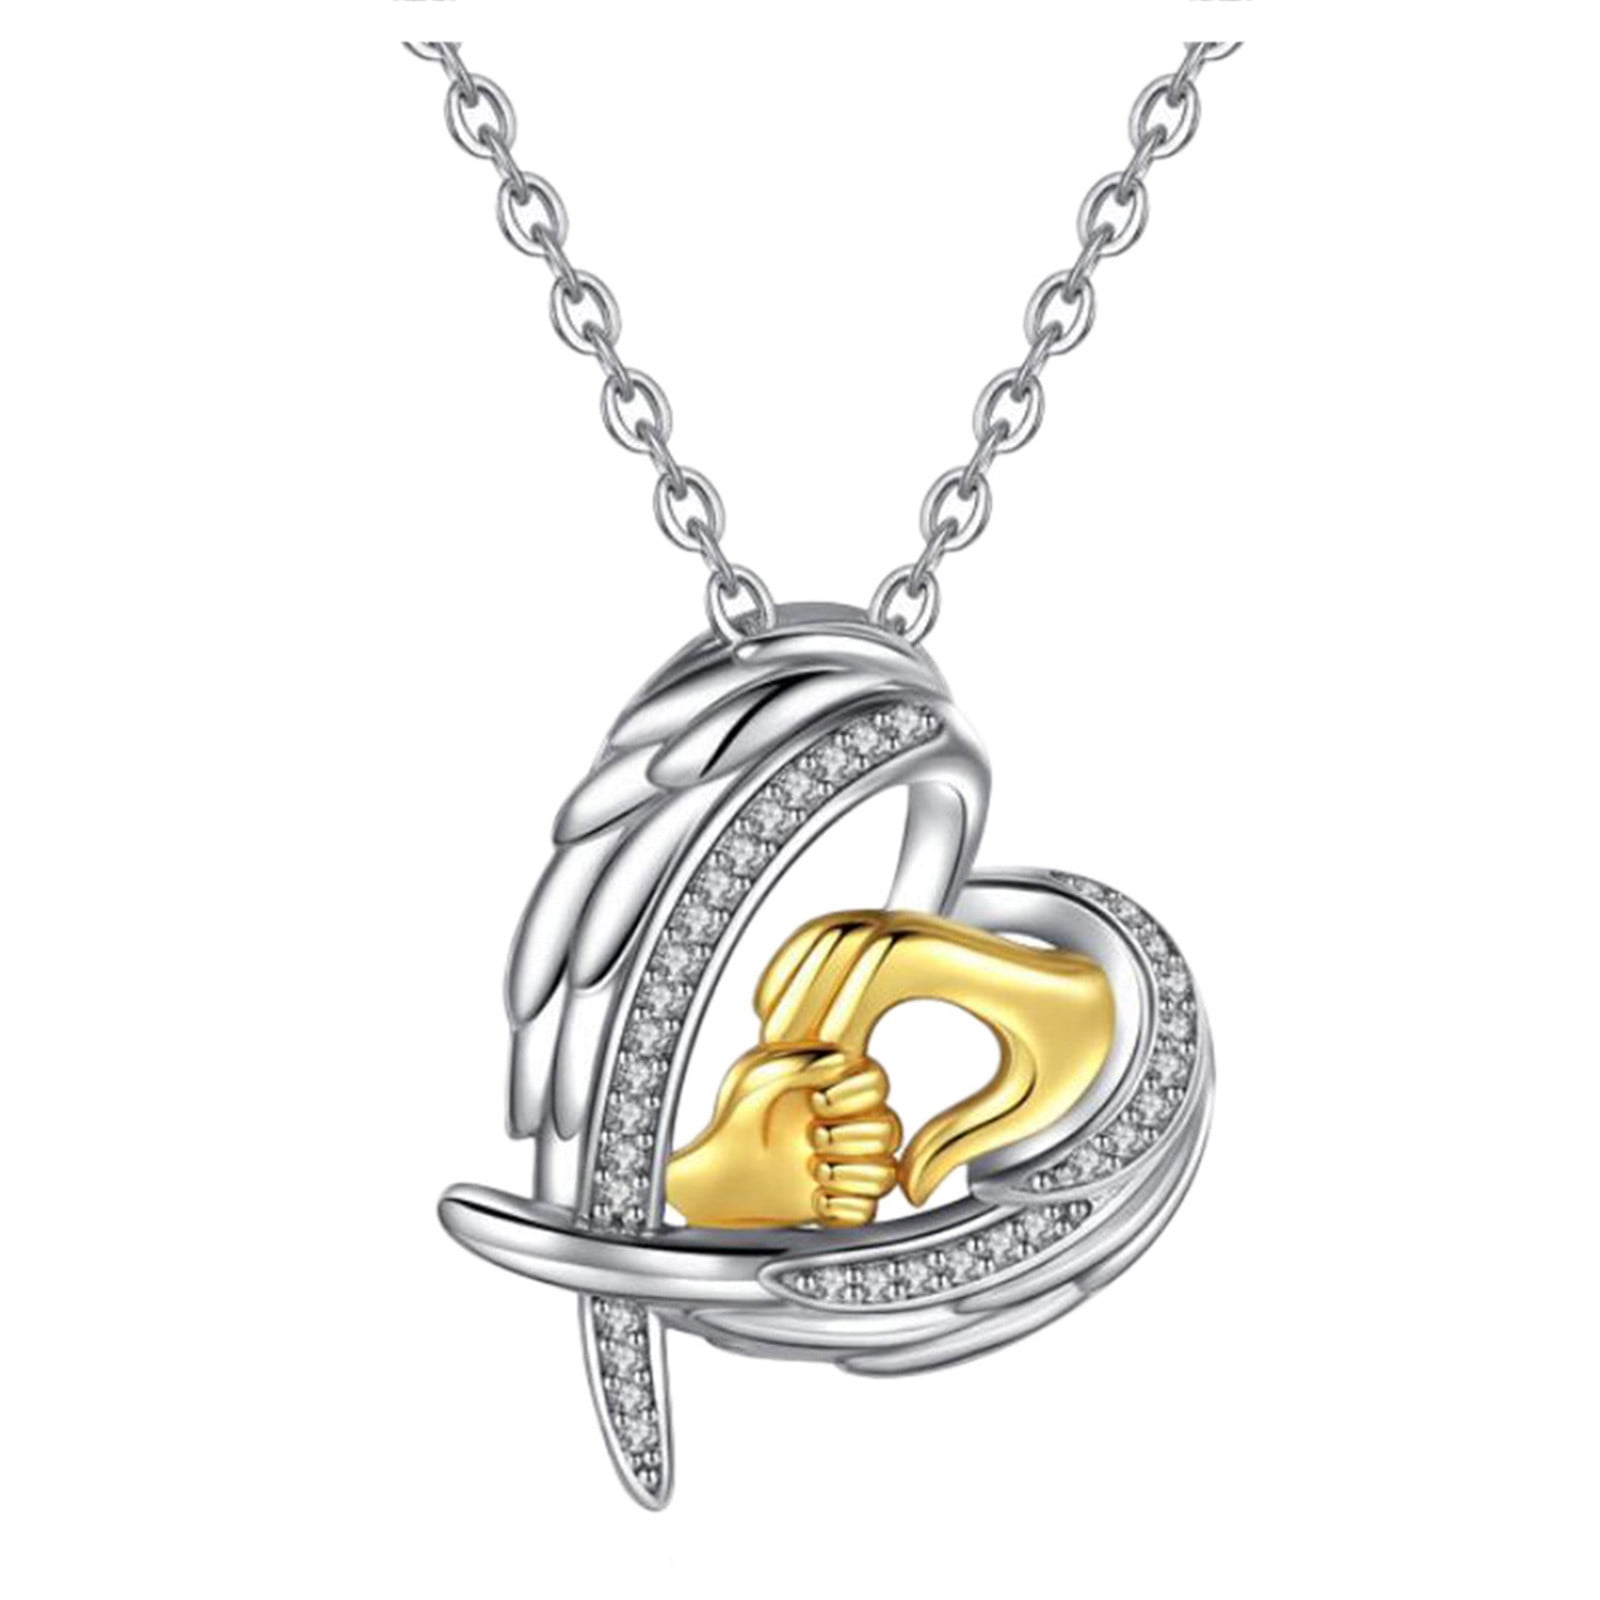 K988 Wing Heart Add Pearl Cage Charm S925 Classic Silver Necklace 16" 